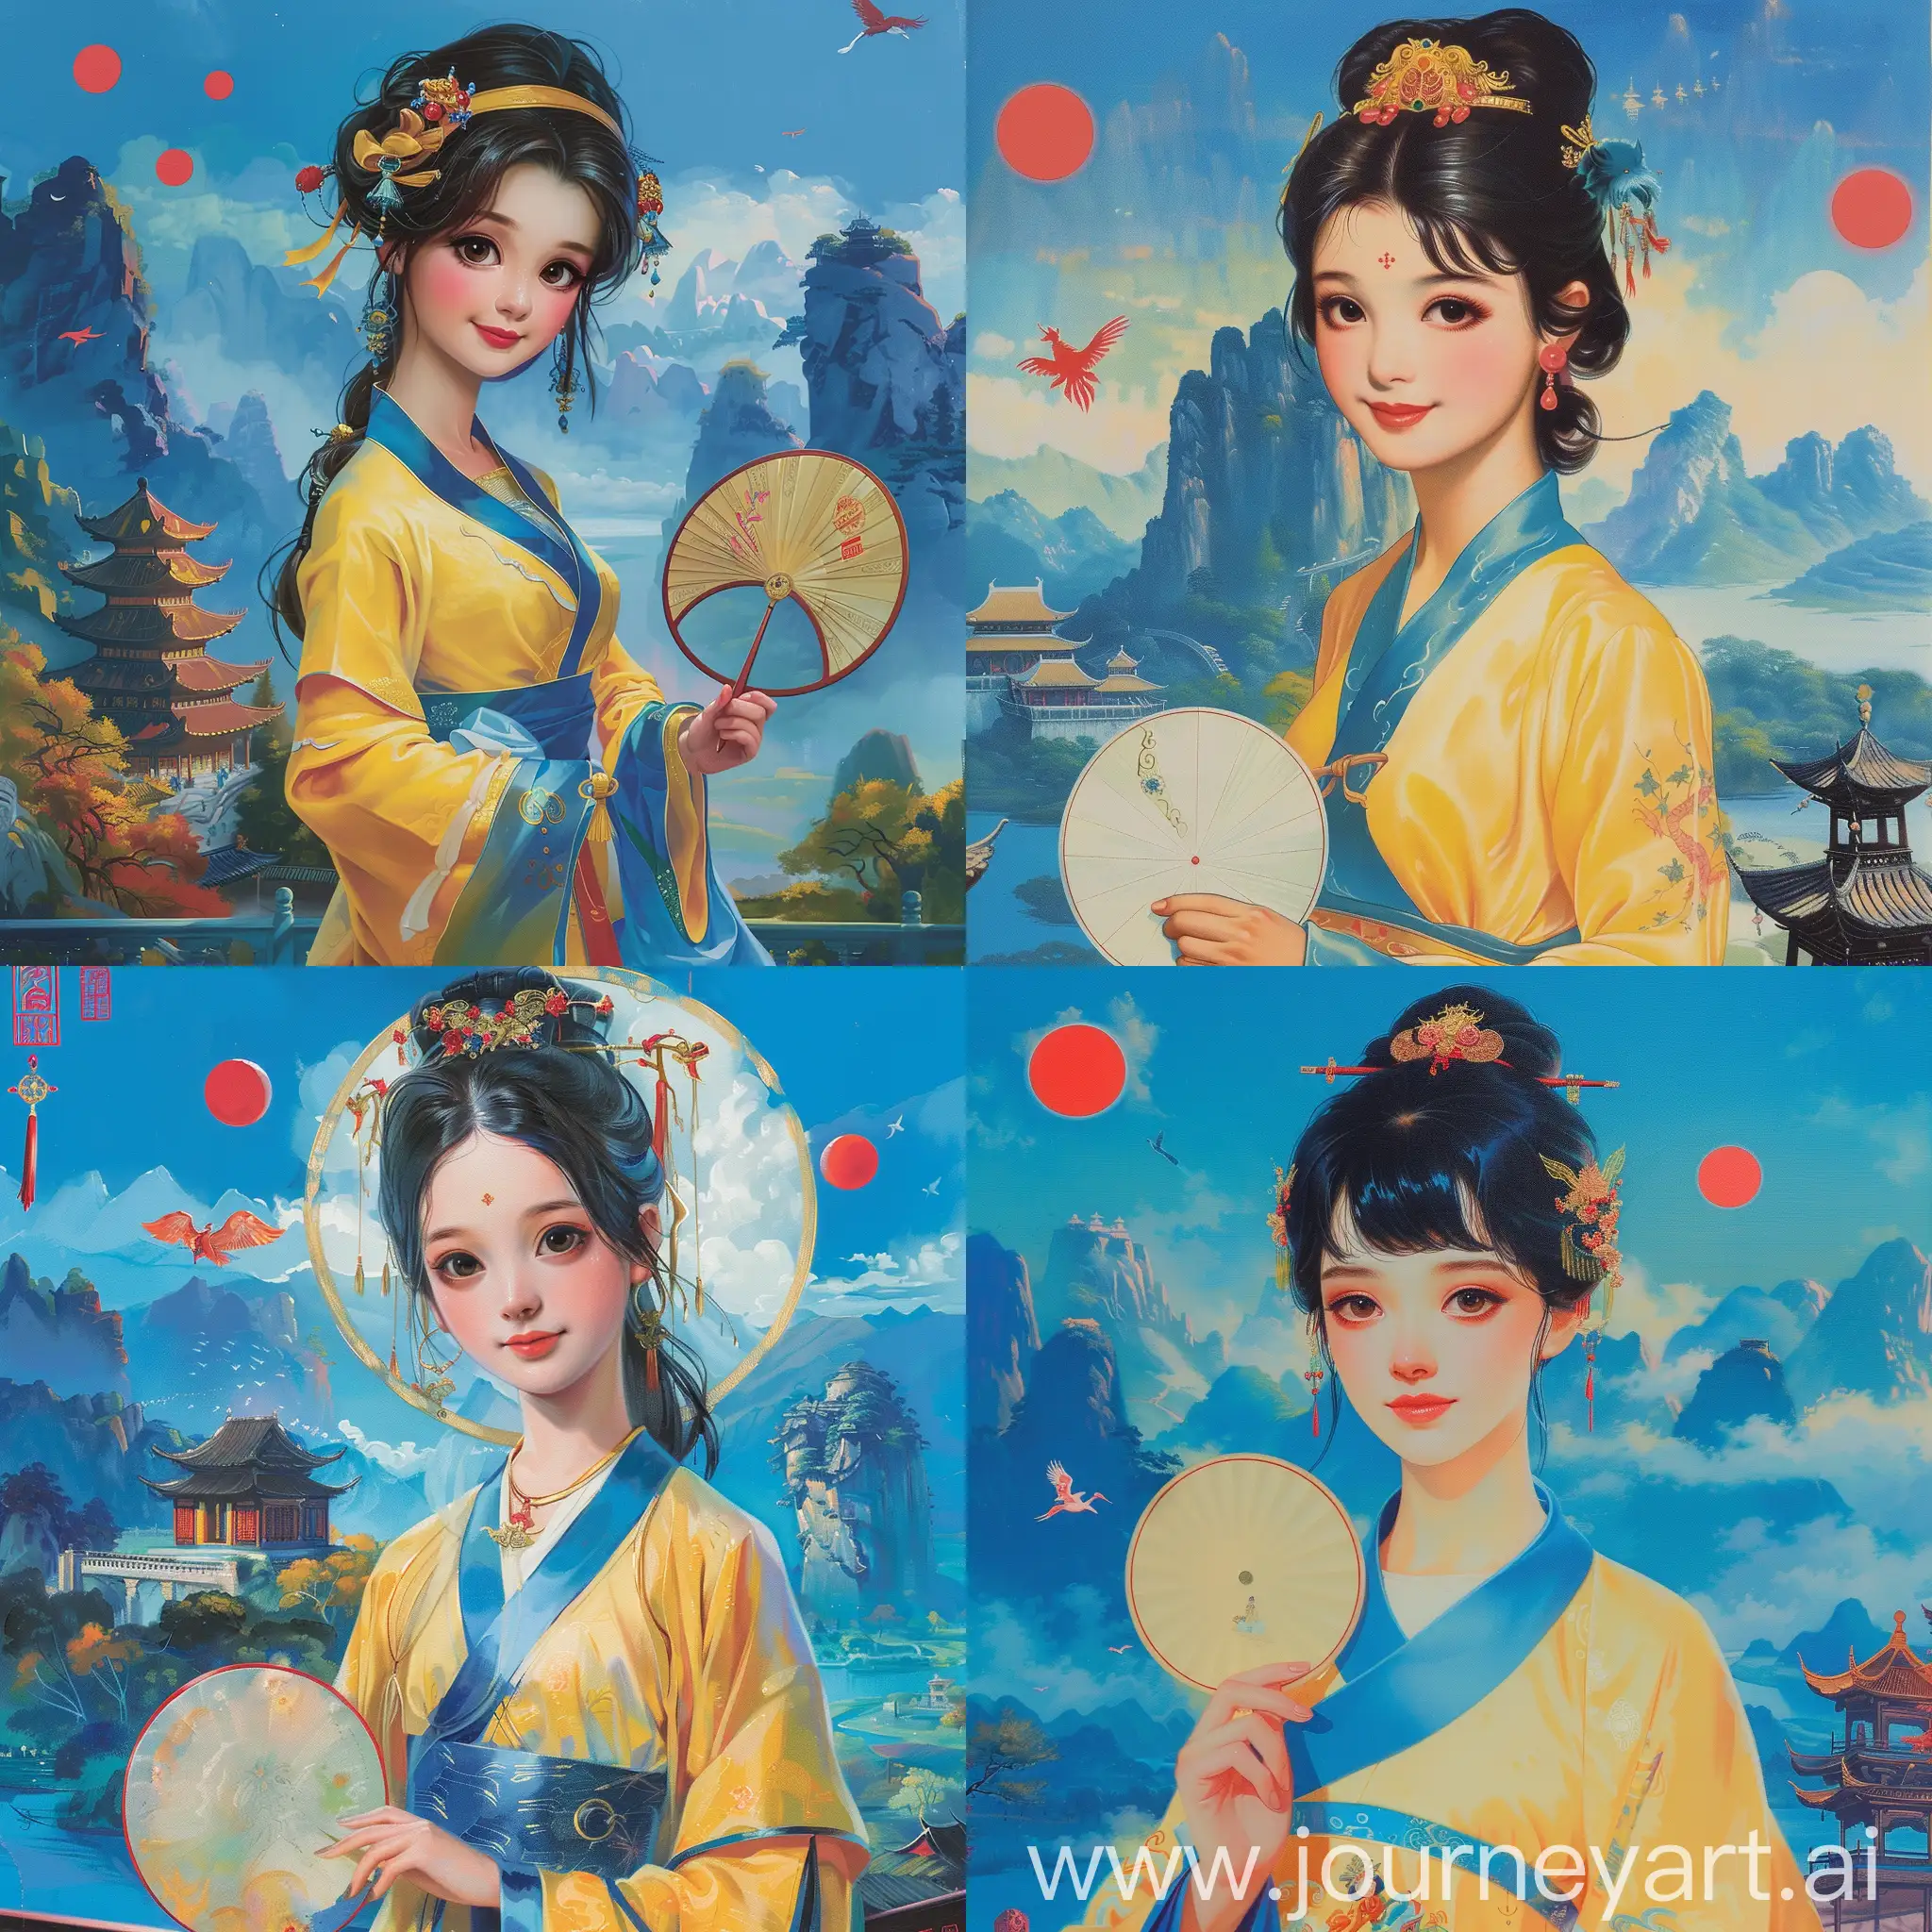 Elegant-Young-Lady-Xue-Baochai-in-Disney-Style-Ming-Dynasty-Hanfu-with-Chinese-Temple-Background